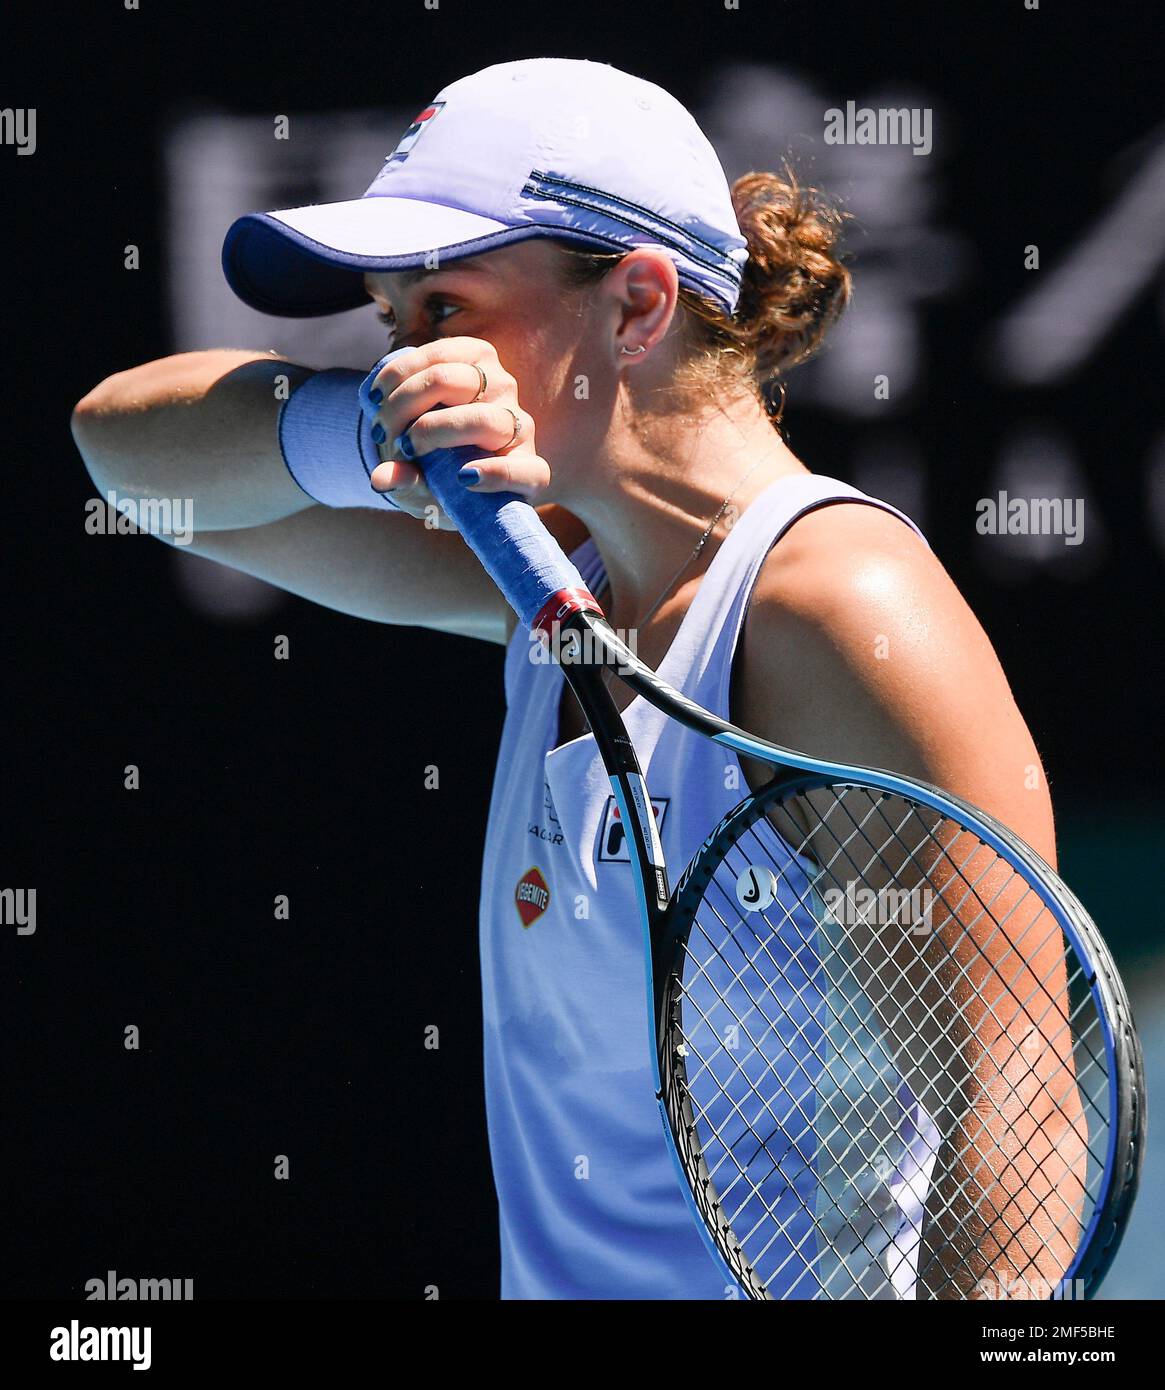 Australia's Ash Barty wipes the sweat from her face during her quarterfinal  match against Karolina Muchova of the Czech Republic at the Australian Open  tennis championship in Melbourne, Australia, Wednesday, Feb. 17,